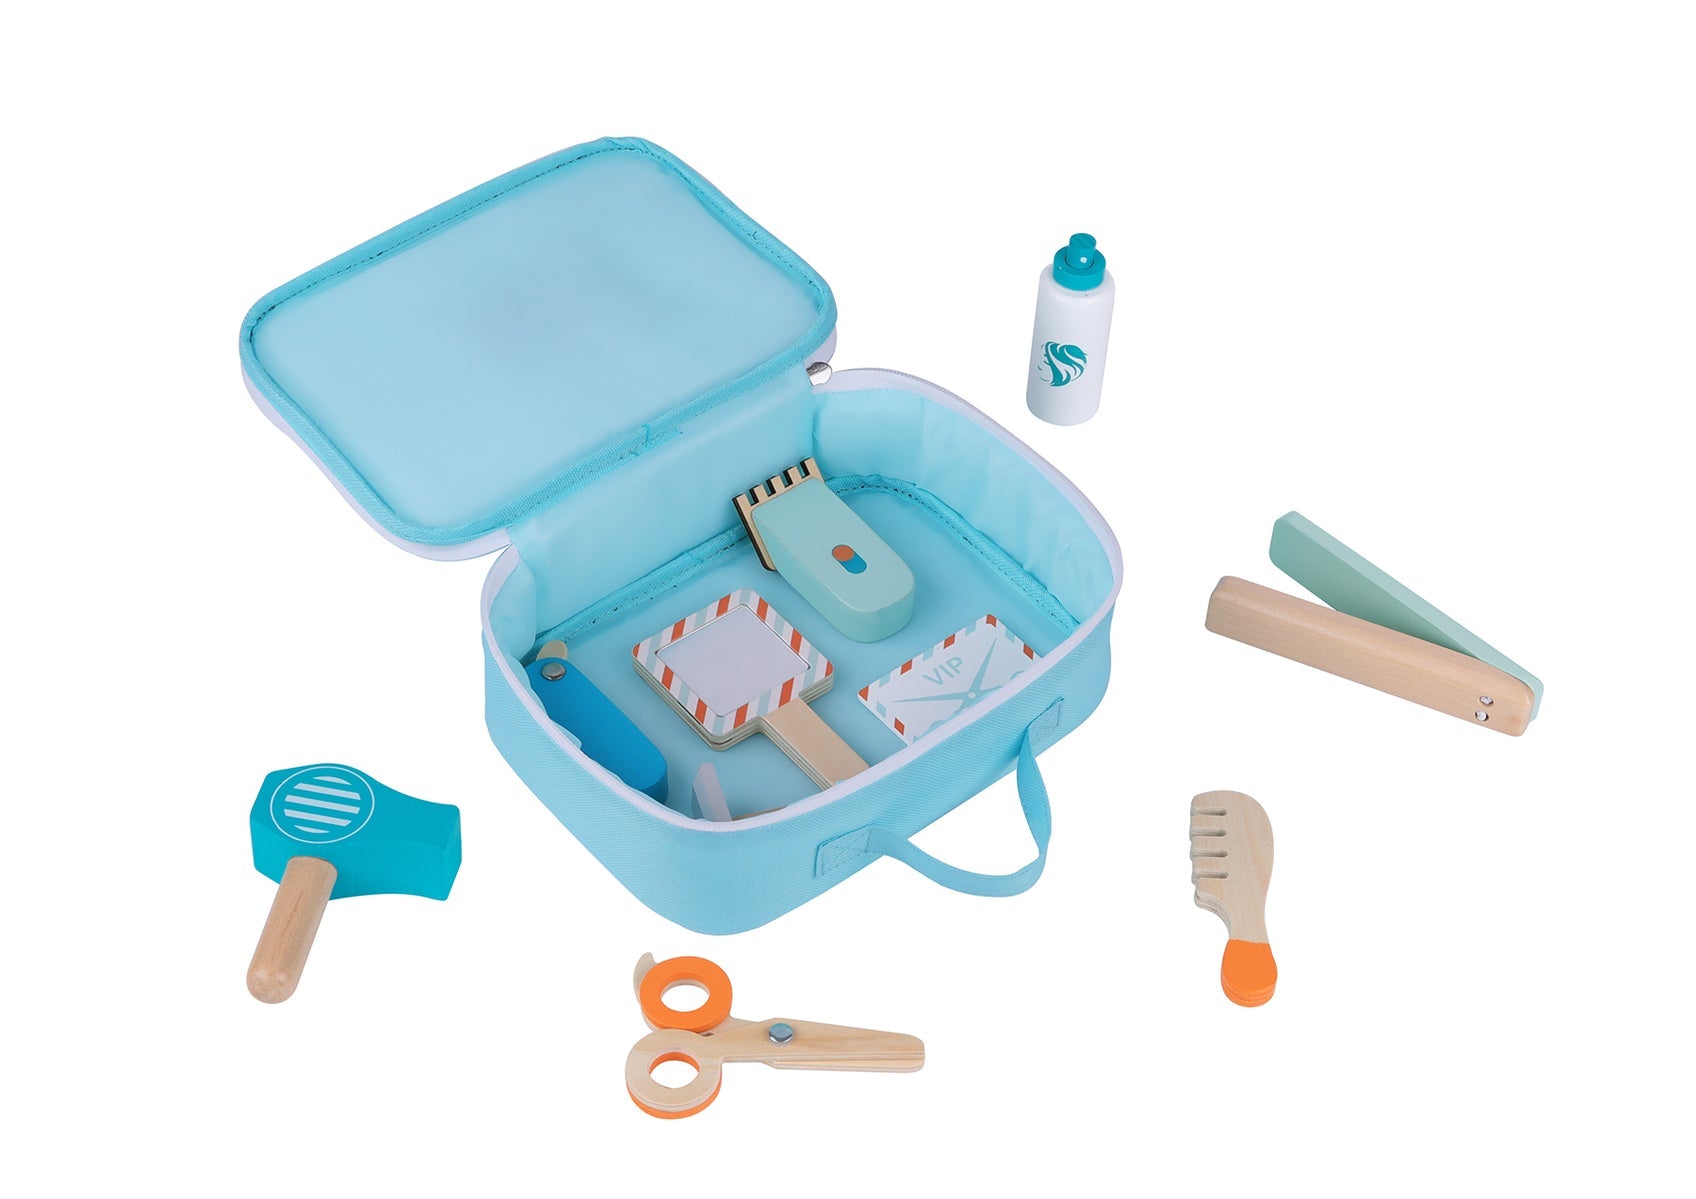 Get Creative with the Little Hairdresser Play Set in Carry Bag